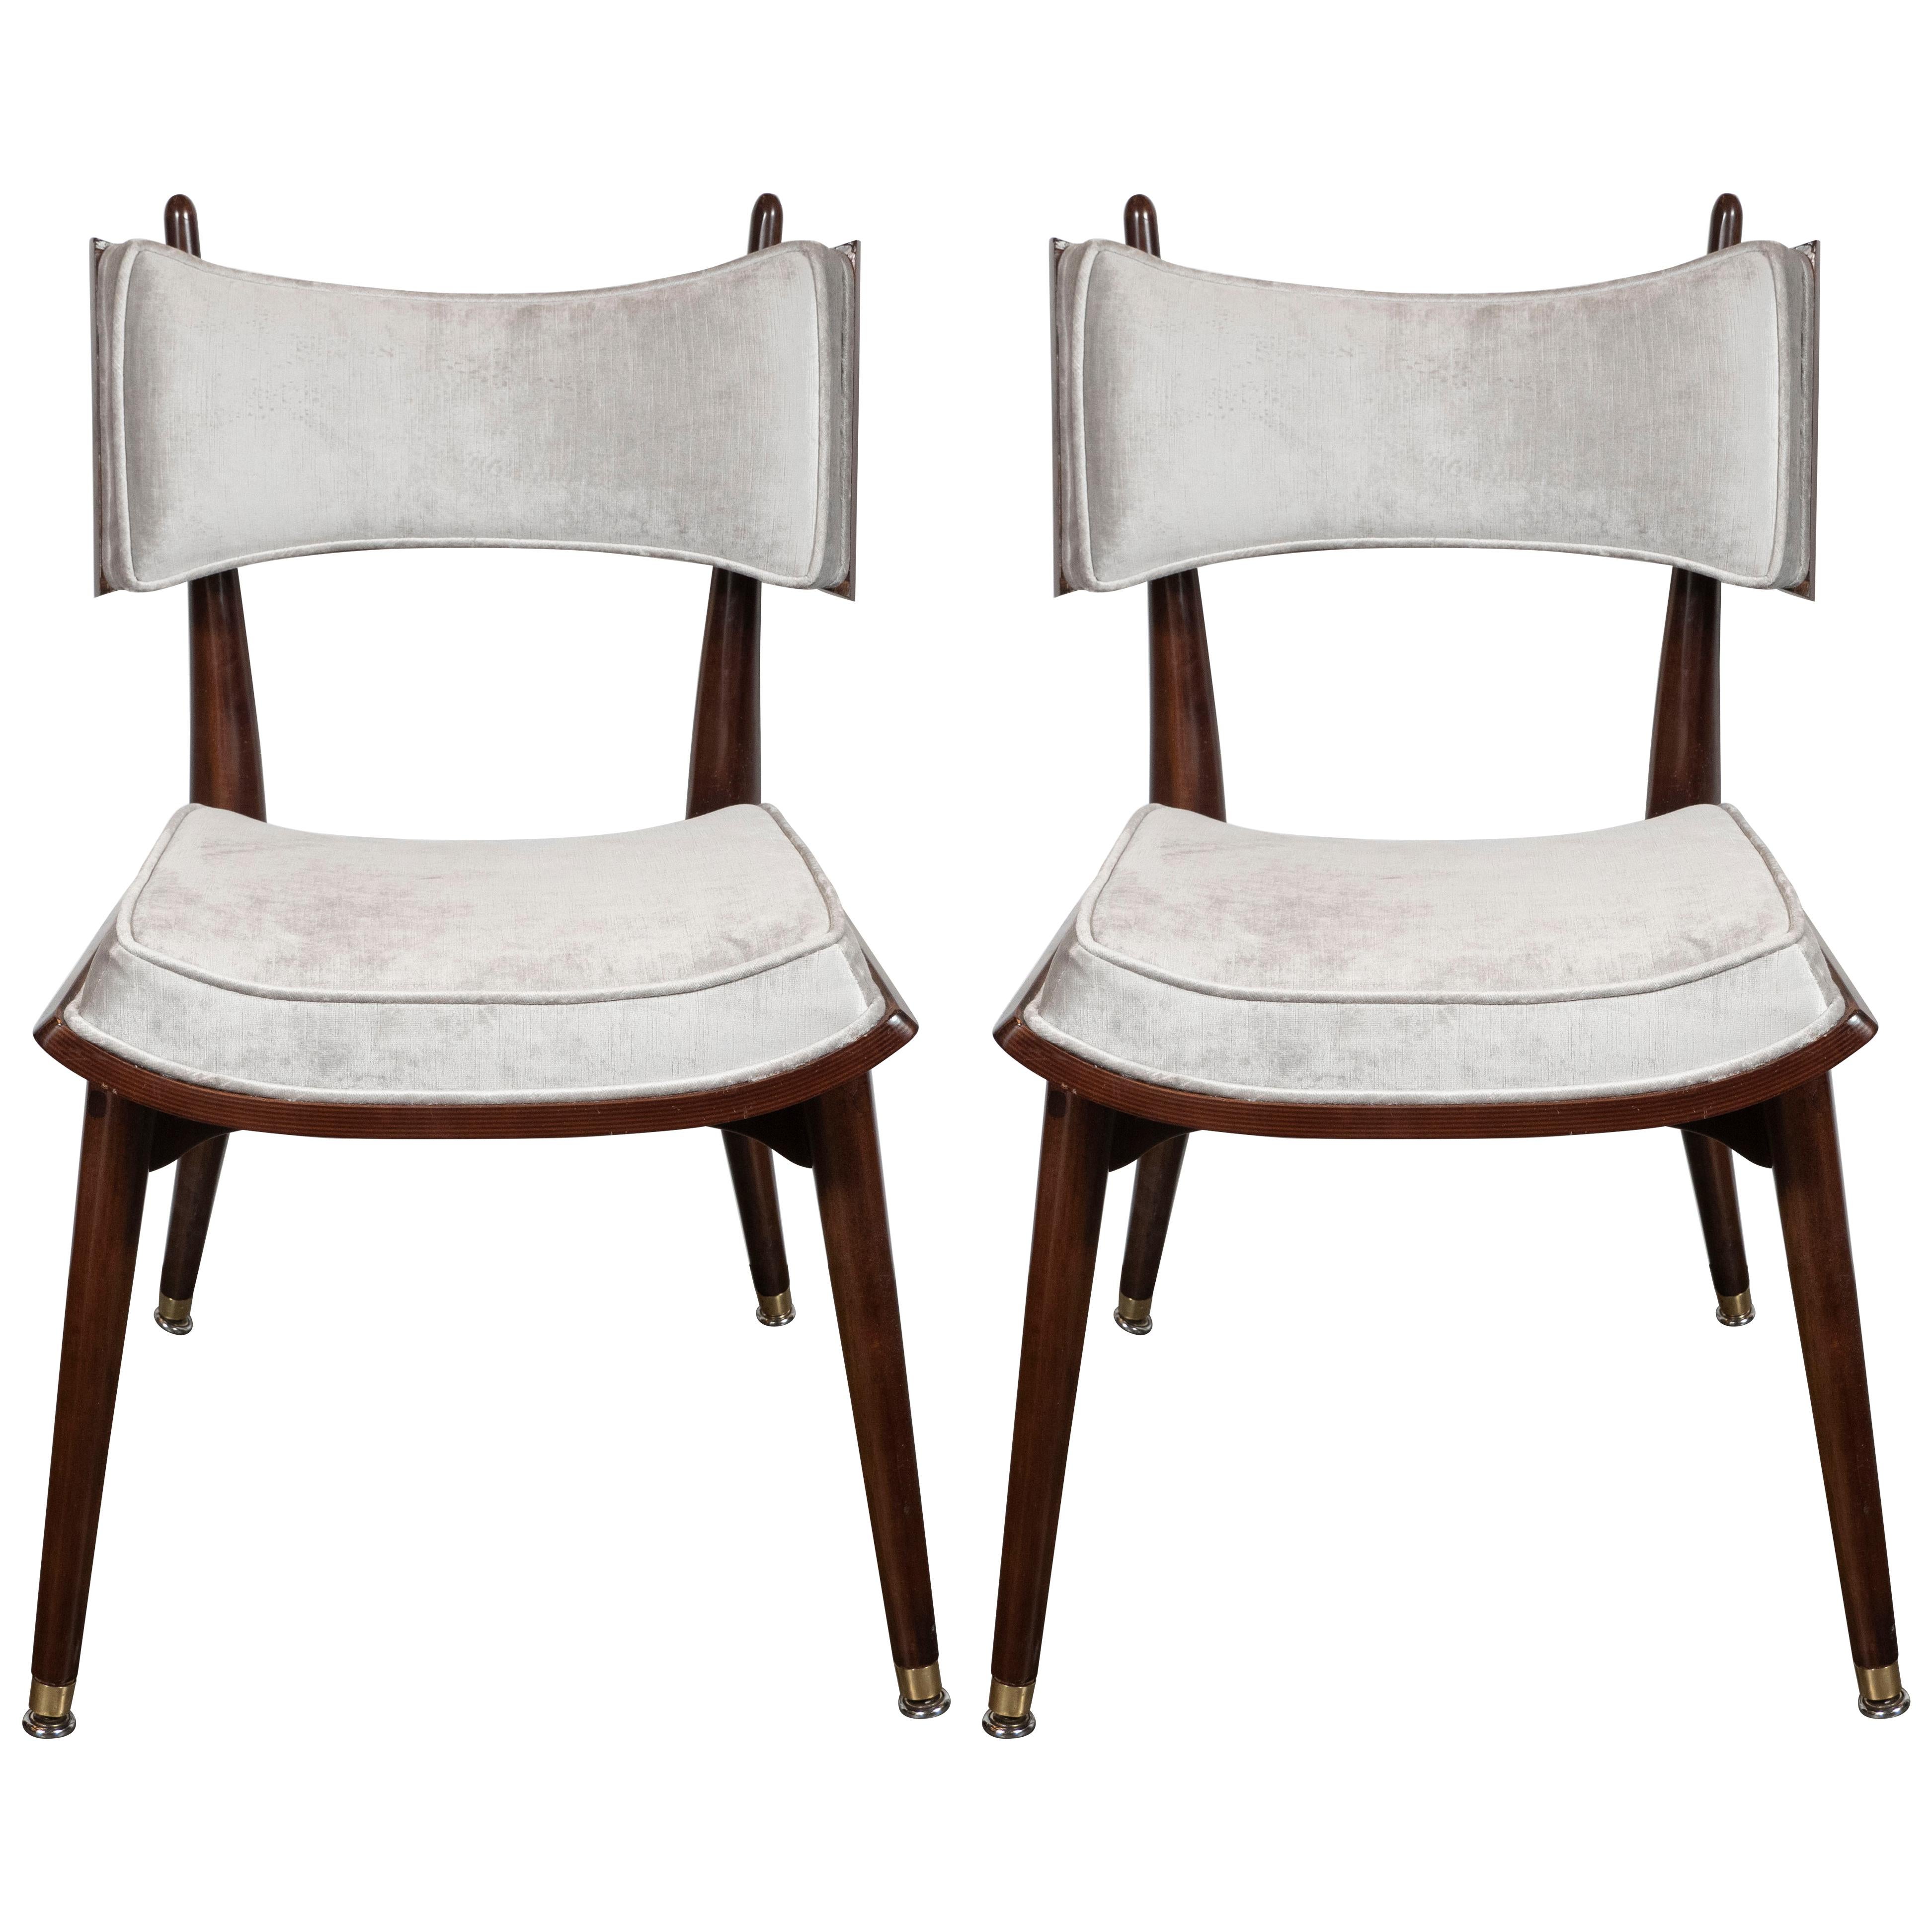 This rare and dramatic set of four game chairs were realized by the esteemed Mid-Century Modern Designer Harold Schwartz for the Romweber Furniture Co. in America, circa 1960. Handmade in handrubbed walnut with brass details throughout, two of the